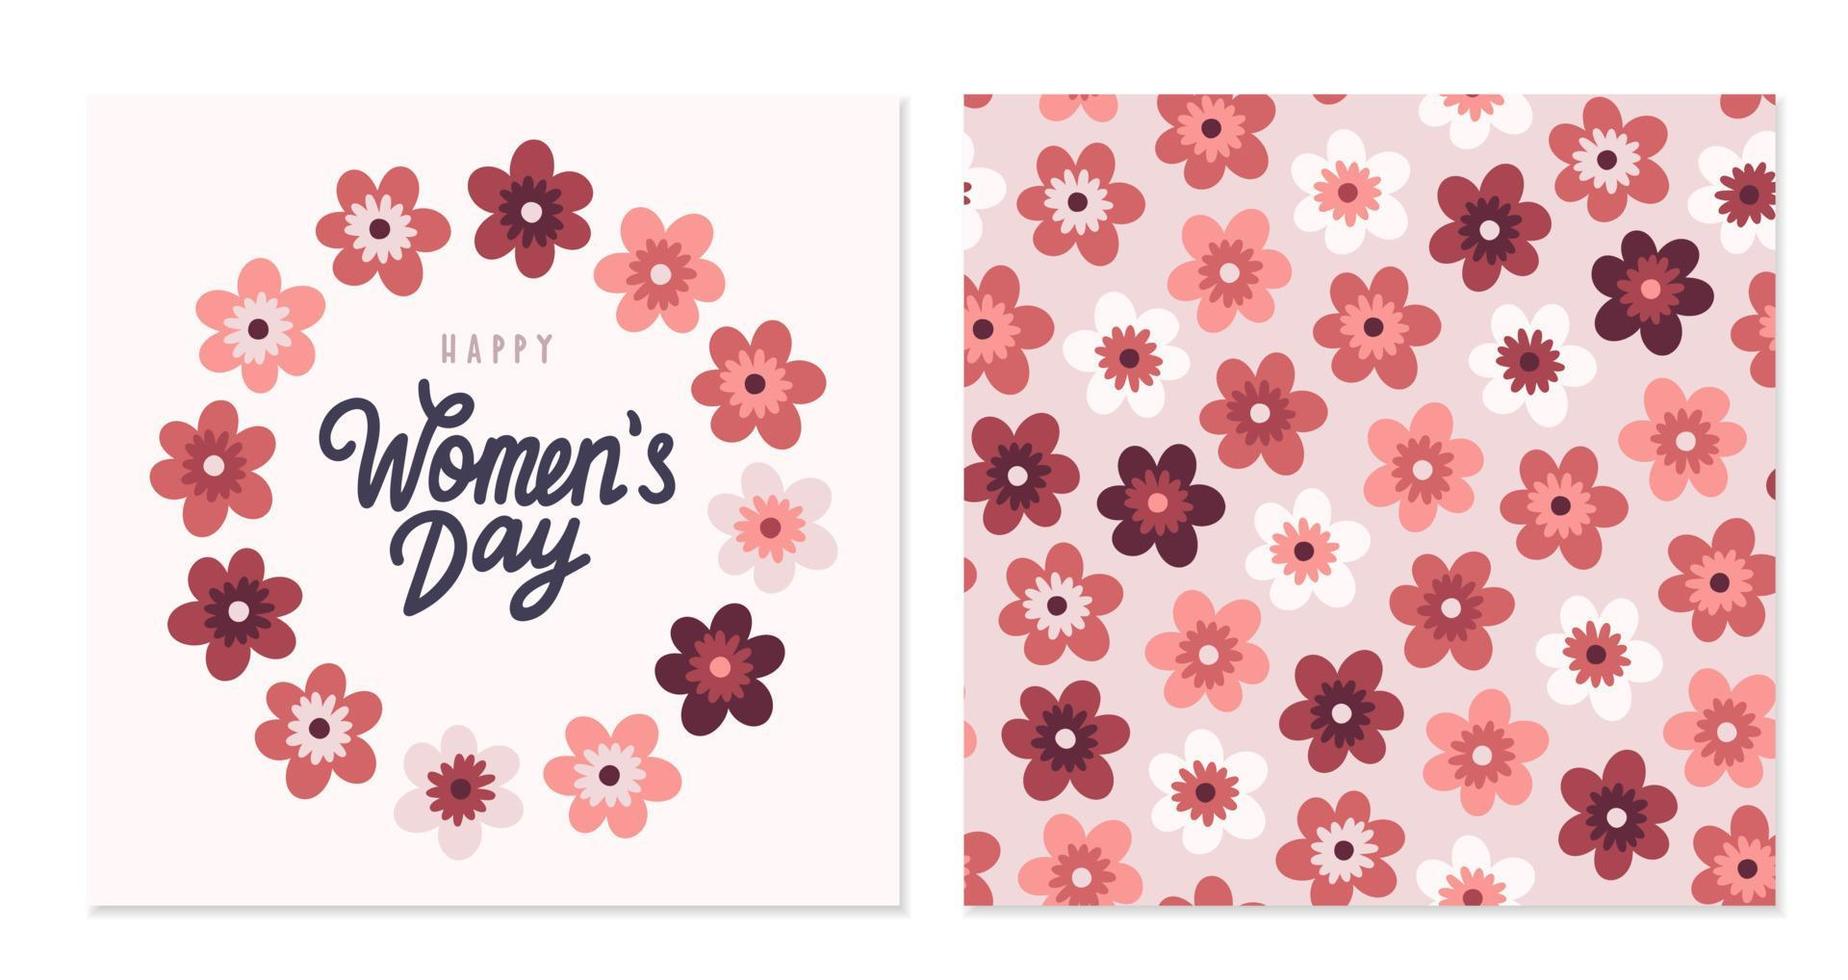 Woman's day cards vector